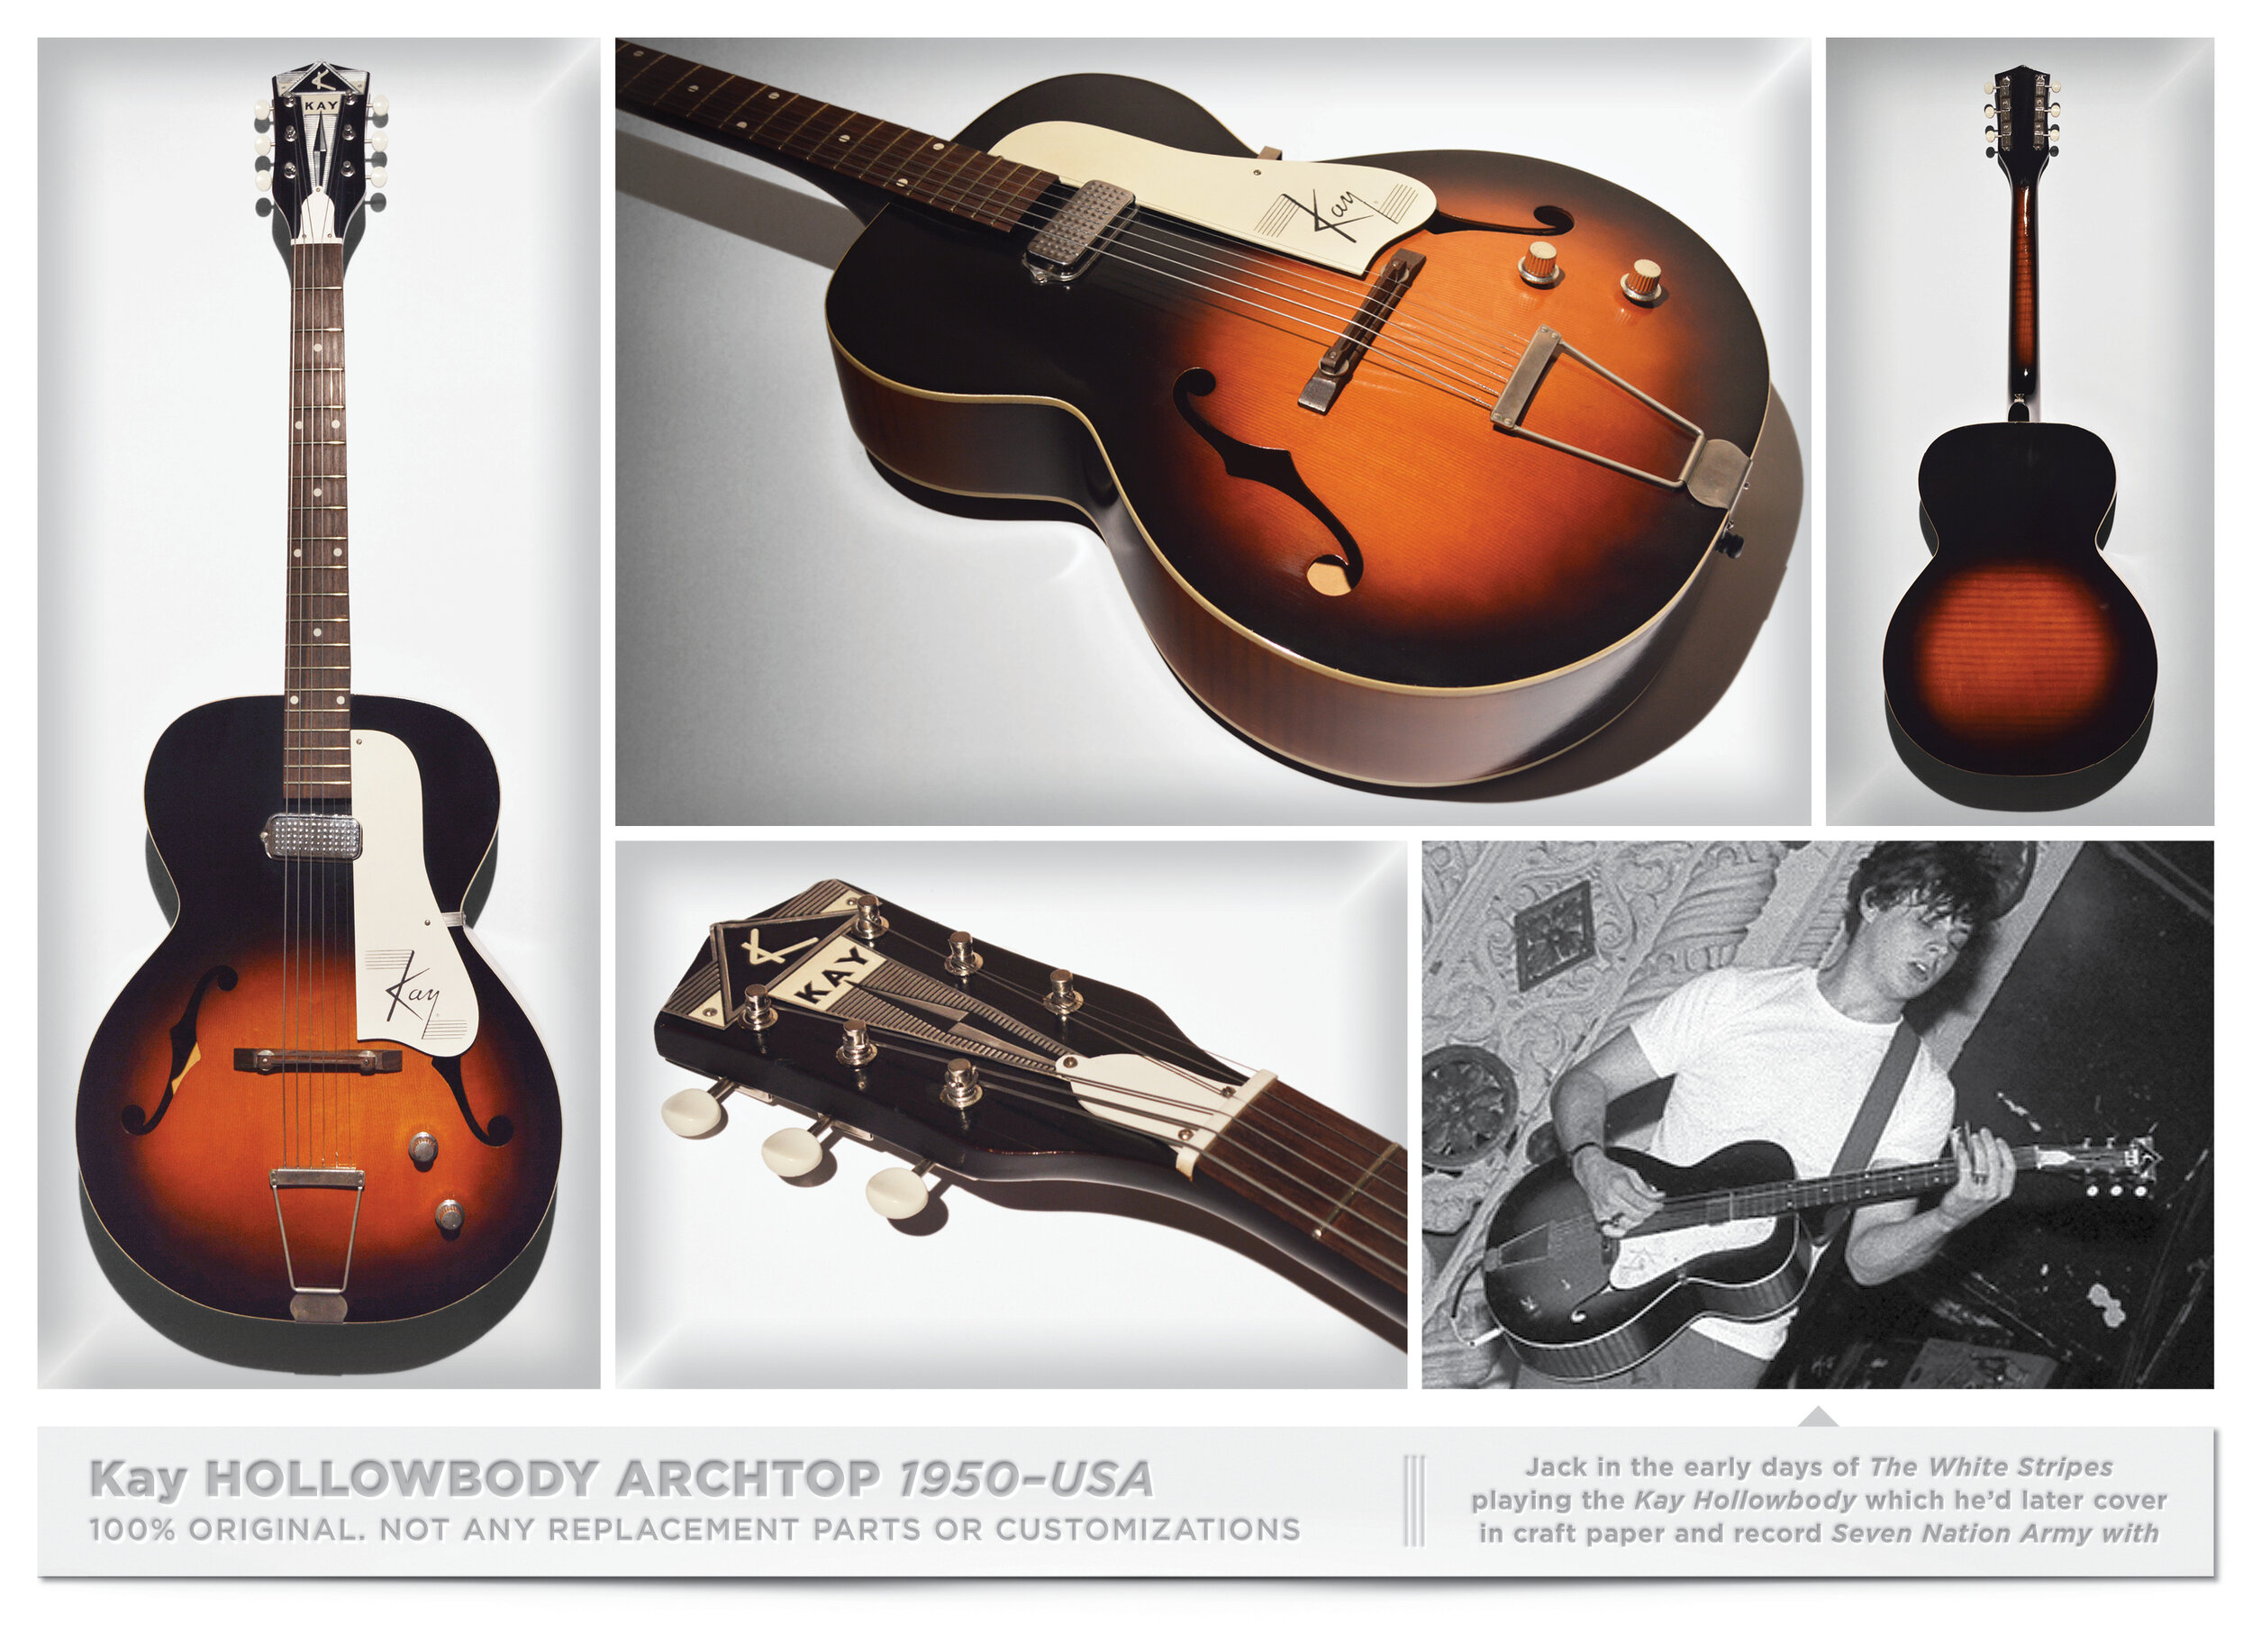 3 Kay HOLLOWBODY ARCHTOP 1950–USA THE JACK WHITE GUITAR COLLECTION FINAL LAYOUT3.jpg